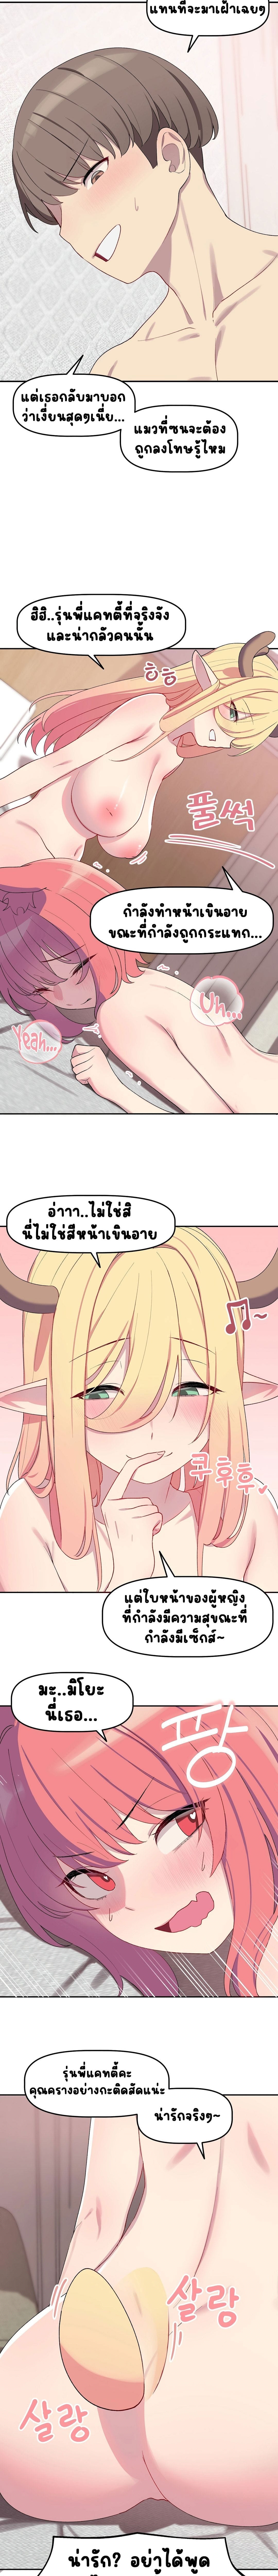 Hospitalized Life in Another World ตอนที่ 4 ภาพ 2